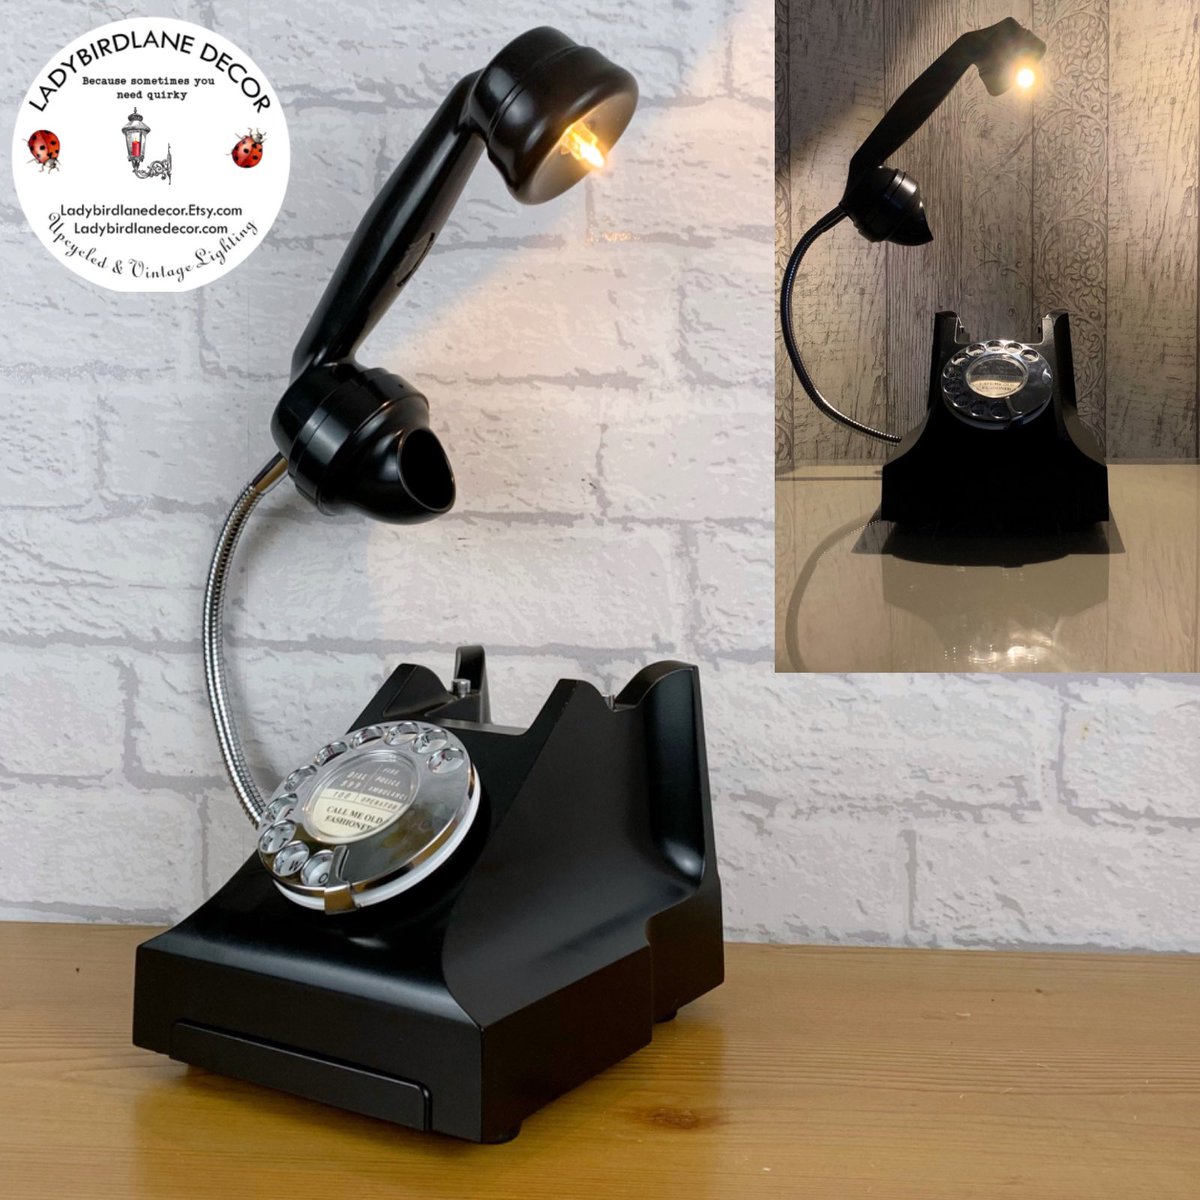 #MHHSBD 𝗜𝗳 𝗼𝗻𝗹𝘆 𝗽𝗵𝗼𝗻𝗲𝘀 𝗰𝗼𝘂𝗹𝗱 𝘁𝗮𝗹𝗸 💡📞 At around 60 years old this Bakelite telephone has a lot of stories. Think of the chats, the gossip, the whispered romance 💘.. The waiting for it to ring. Now it just lights up a corner without having to say a word